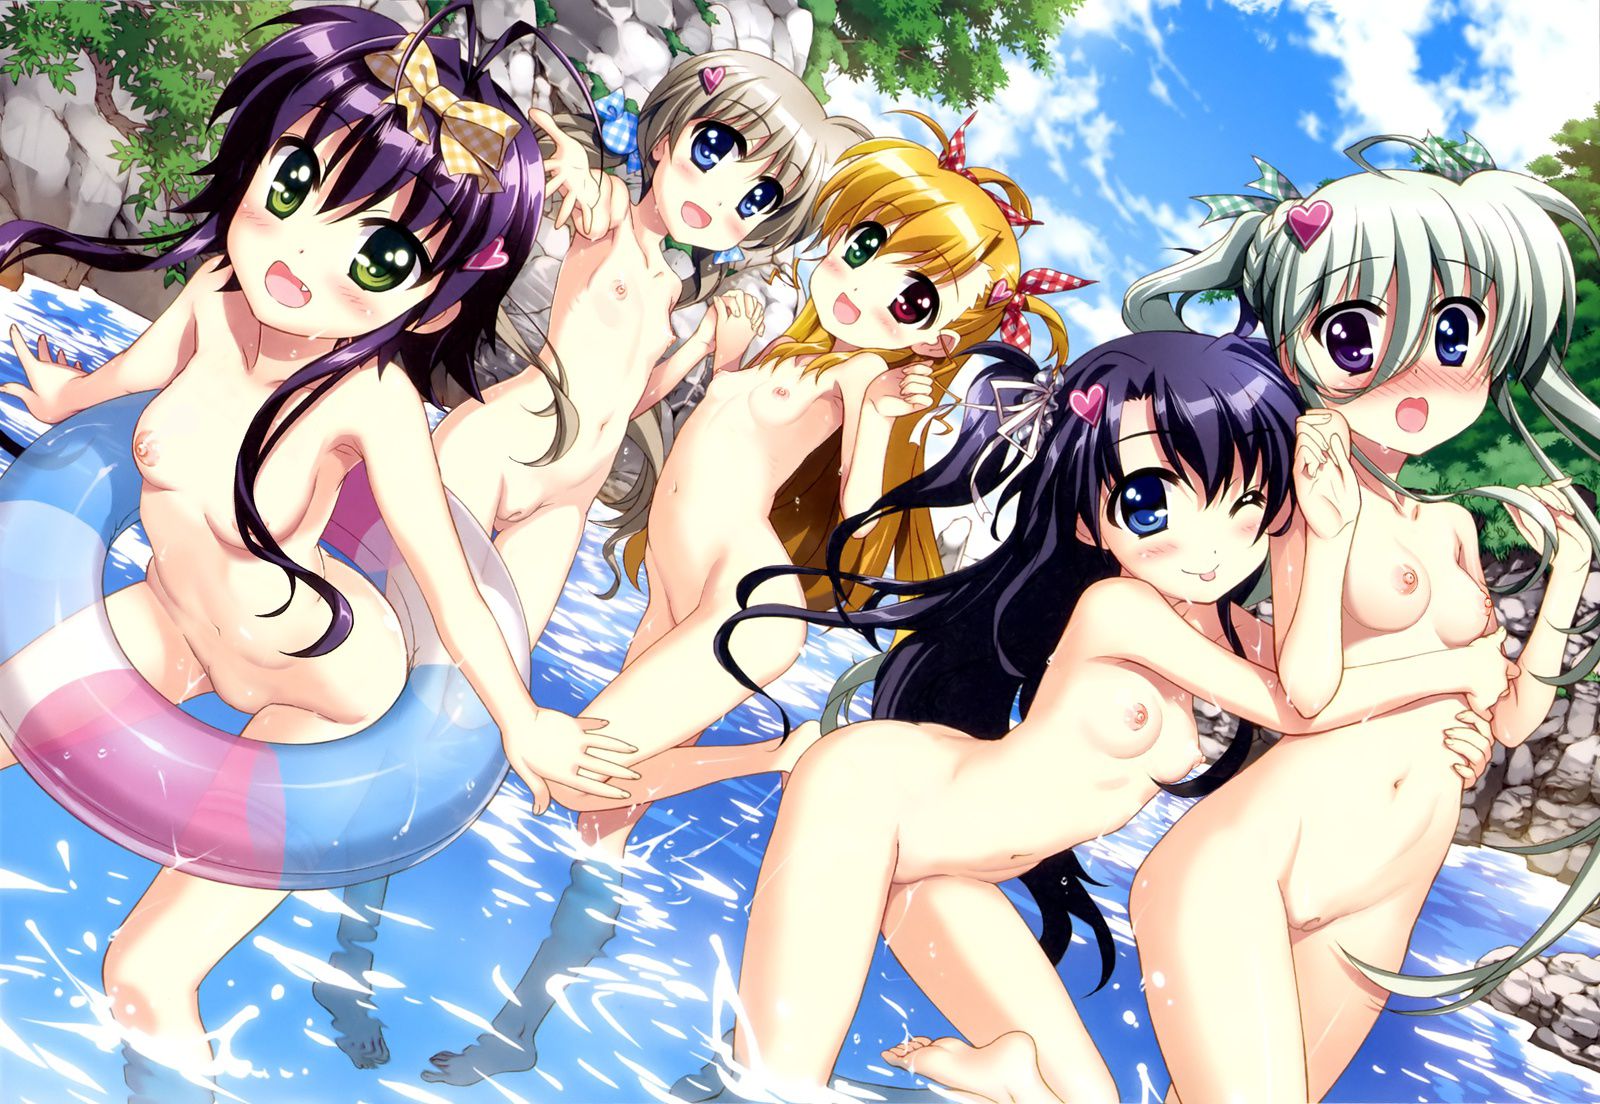 [Magical Girl Lyrical Nanoha] is a thread that will put a random image of erotic 14